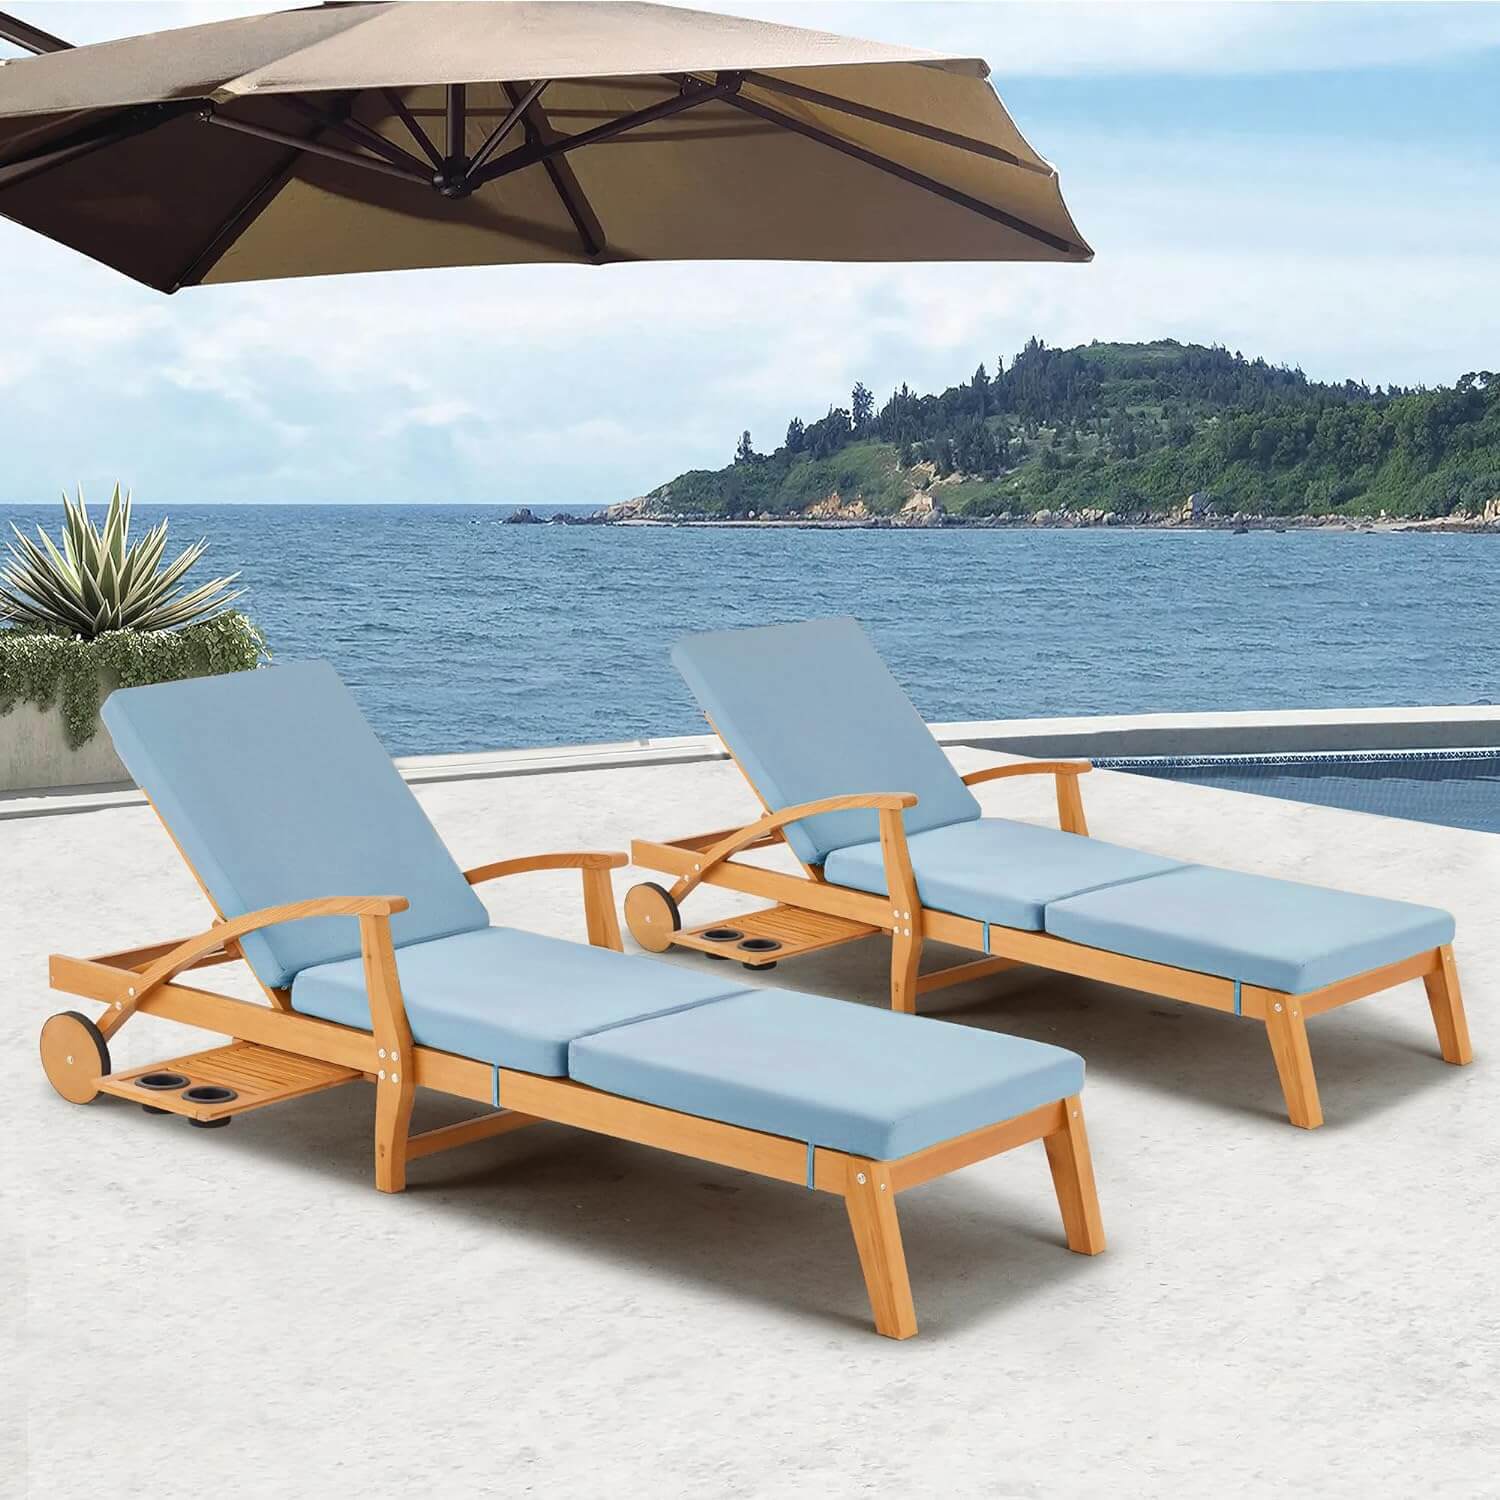 outdoor-wood-chaise-lounge-chair-with-slide-out-tray